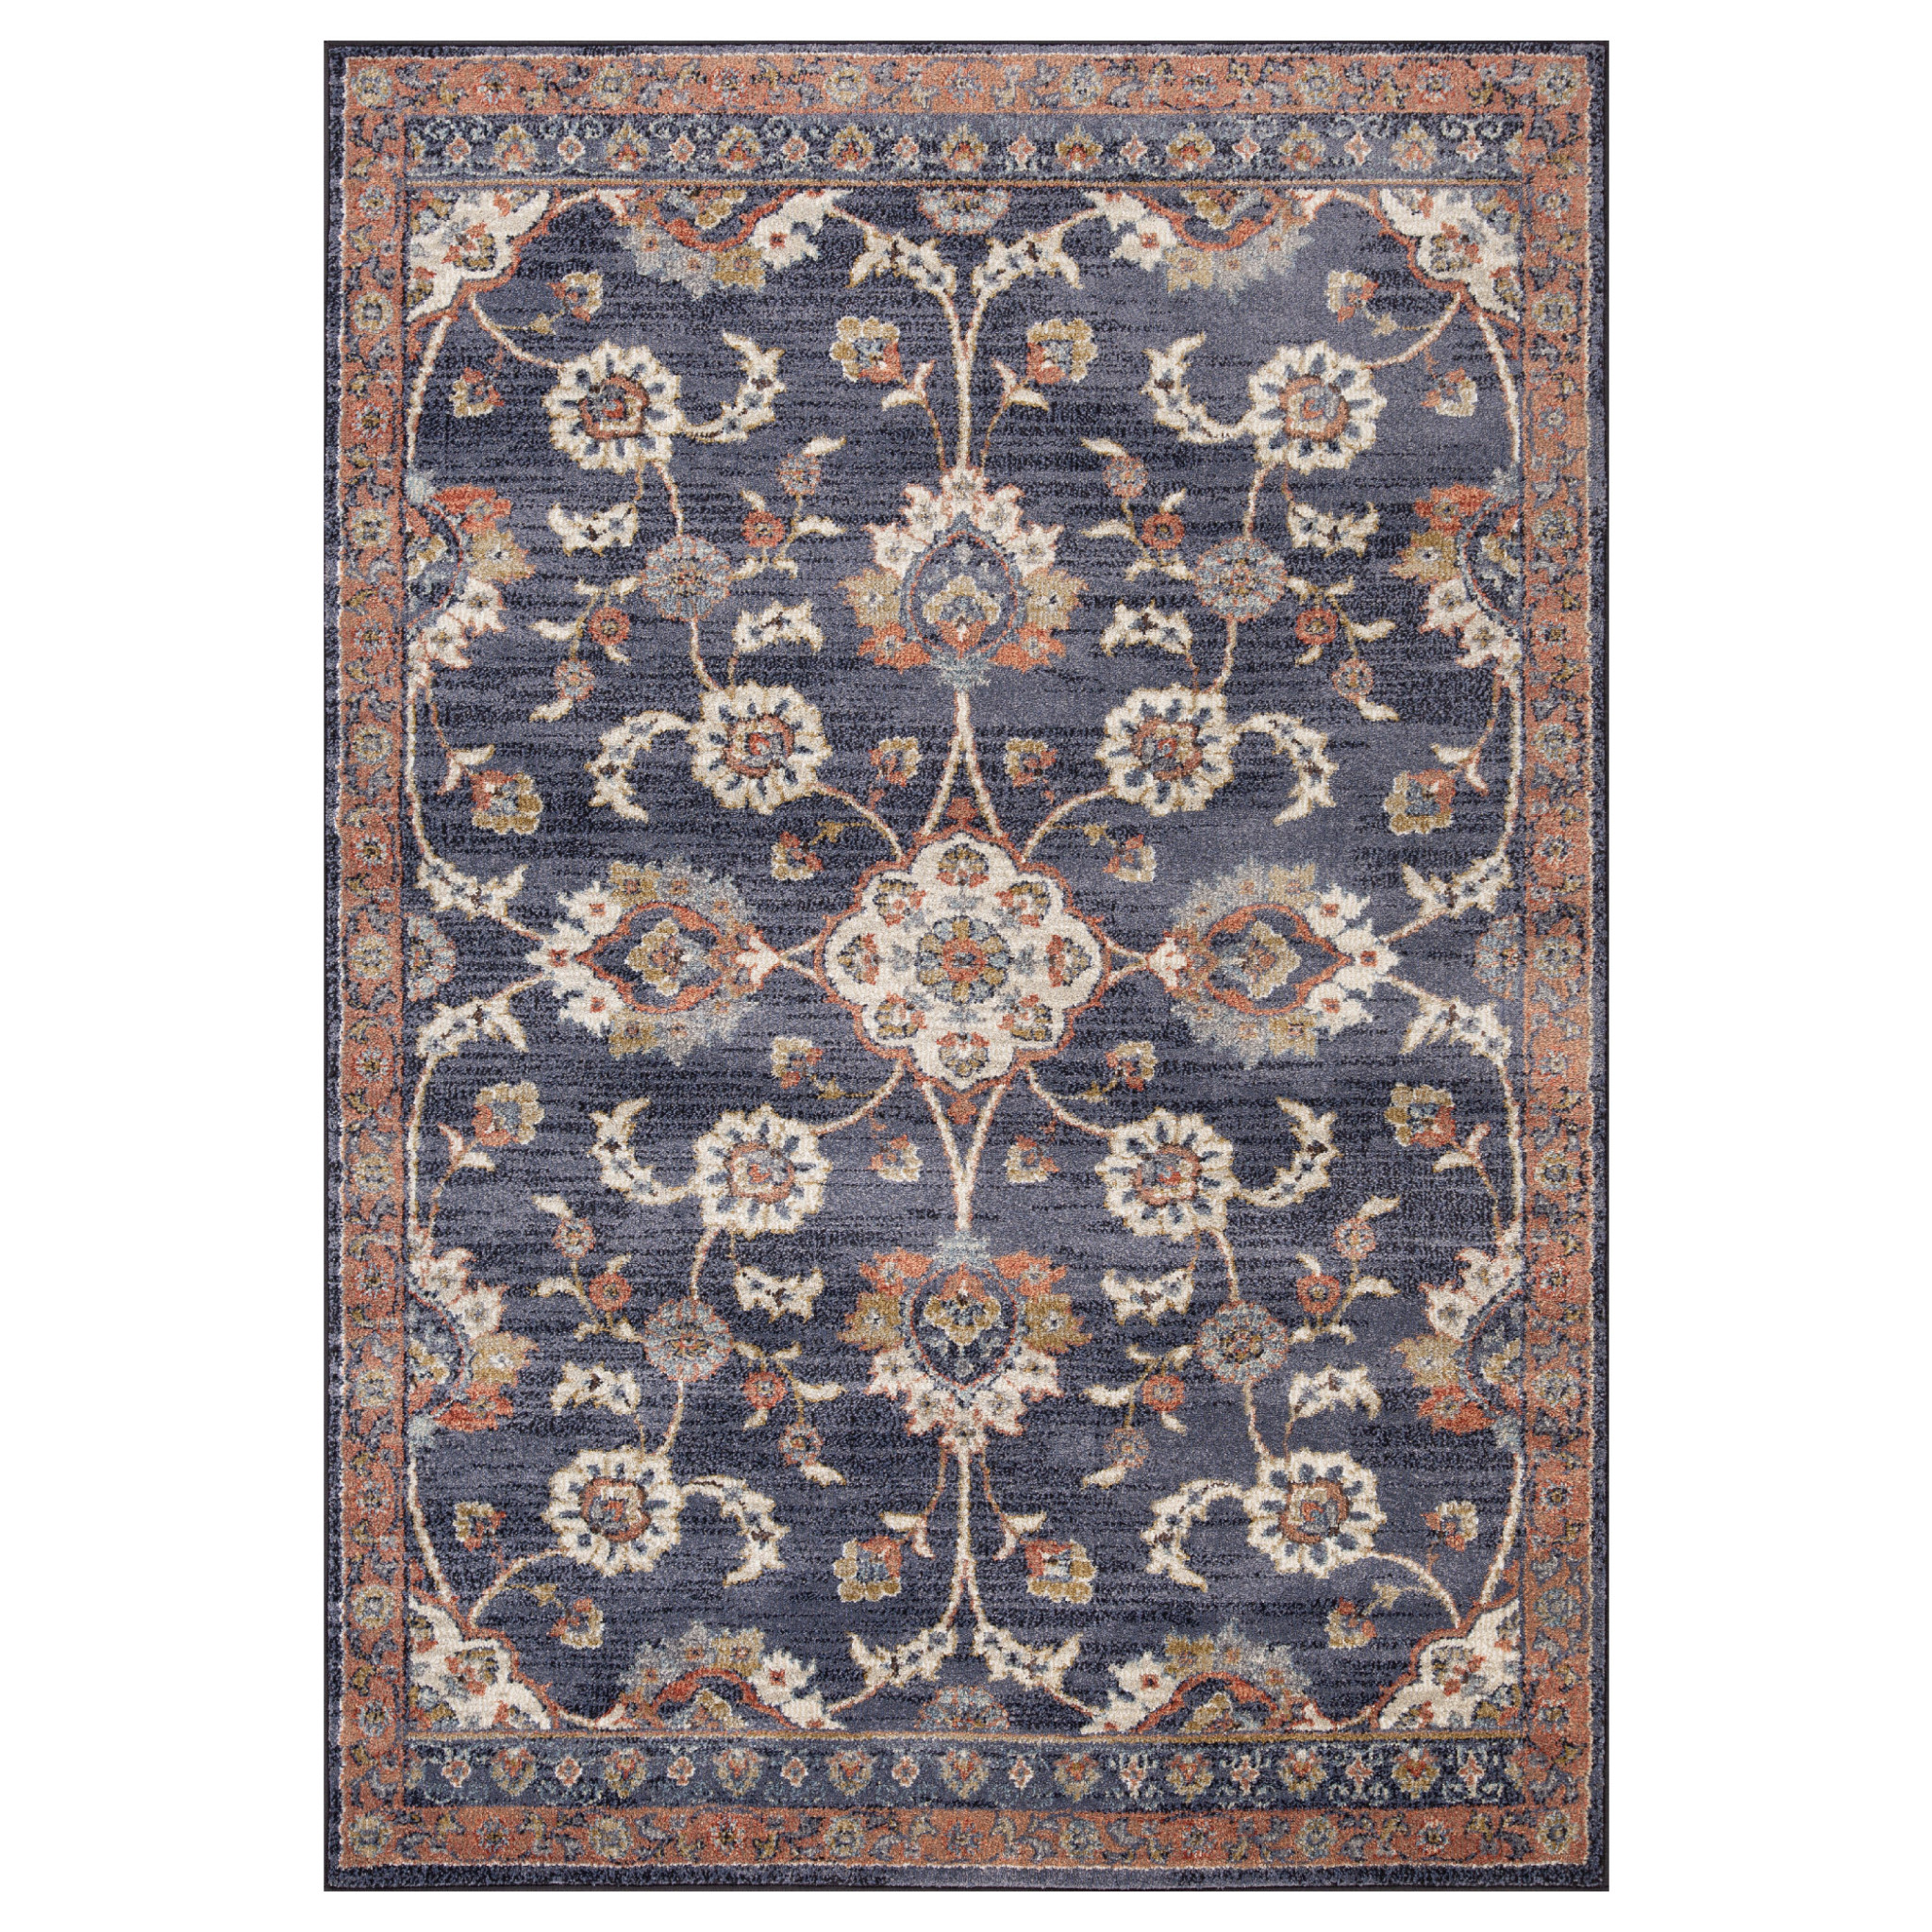 6' x 9' Navy Blue Floral Power Loom Area Rug With Fringe-532156-1